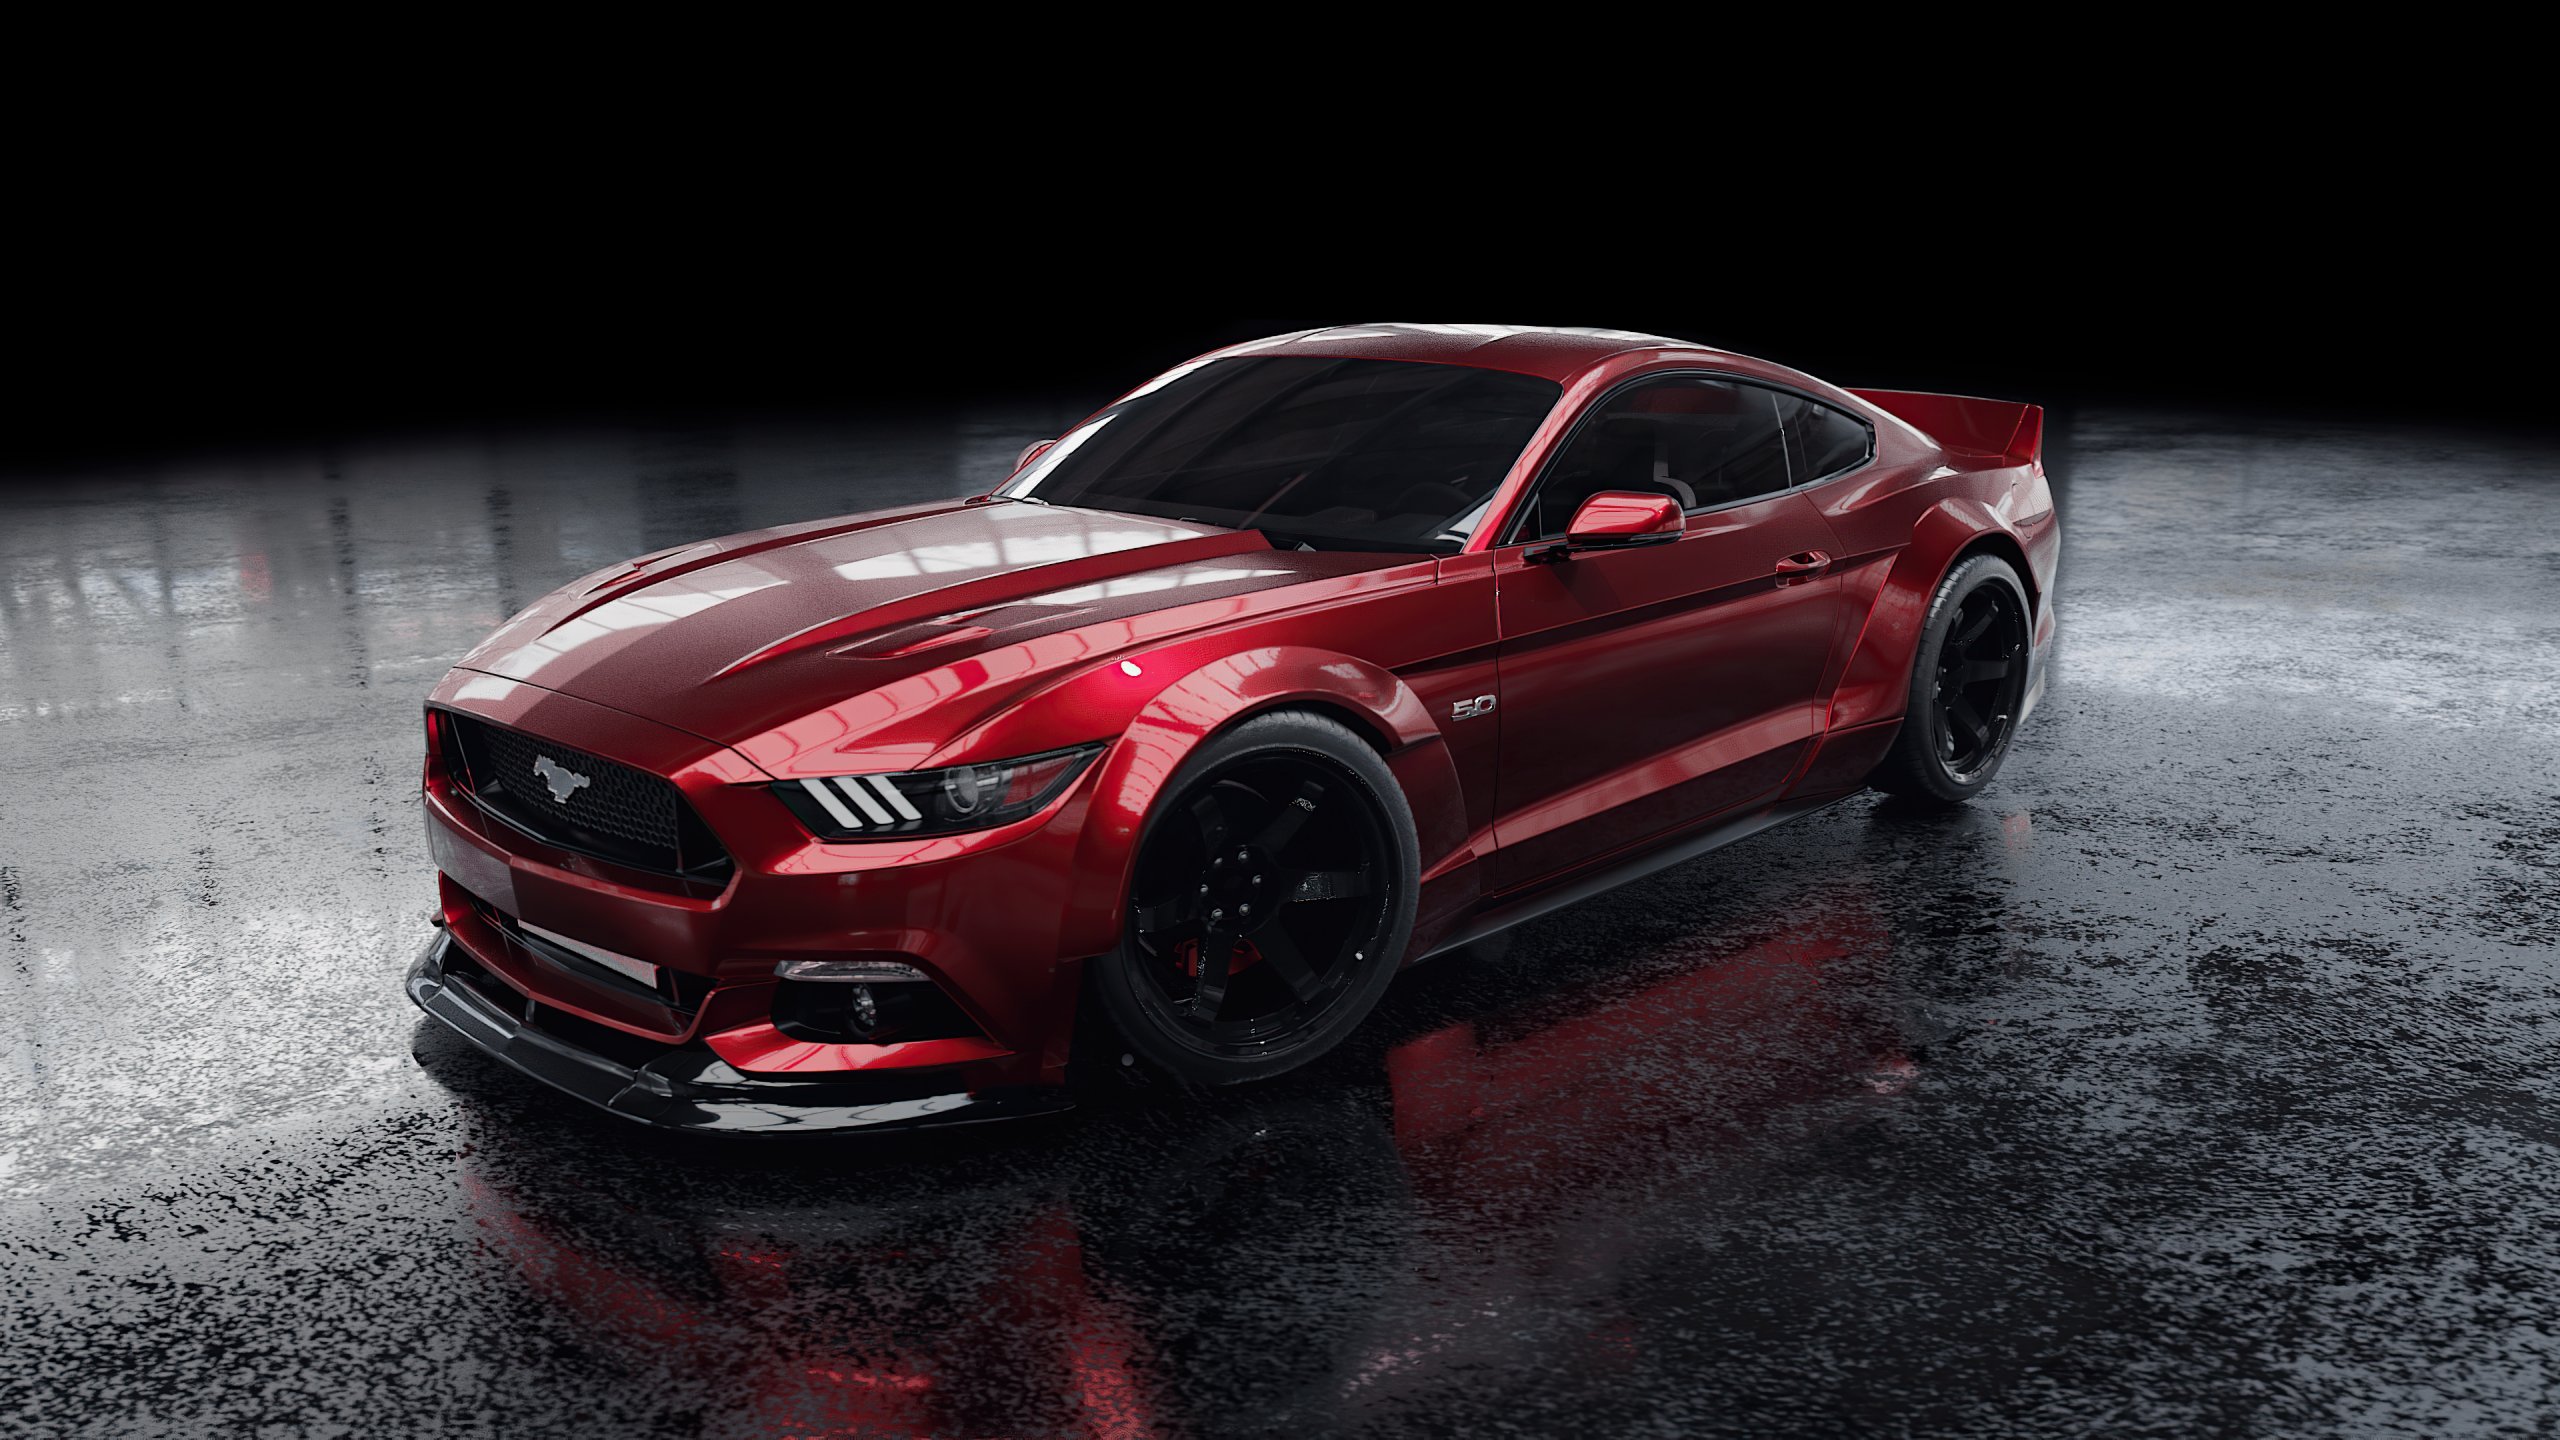 Red Ford Mustang Wallpaper 4k Ultra HD